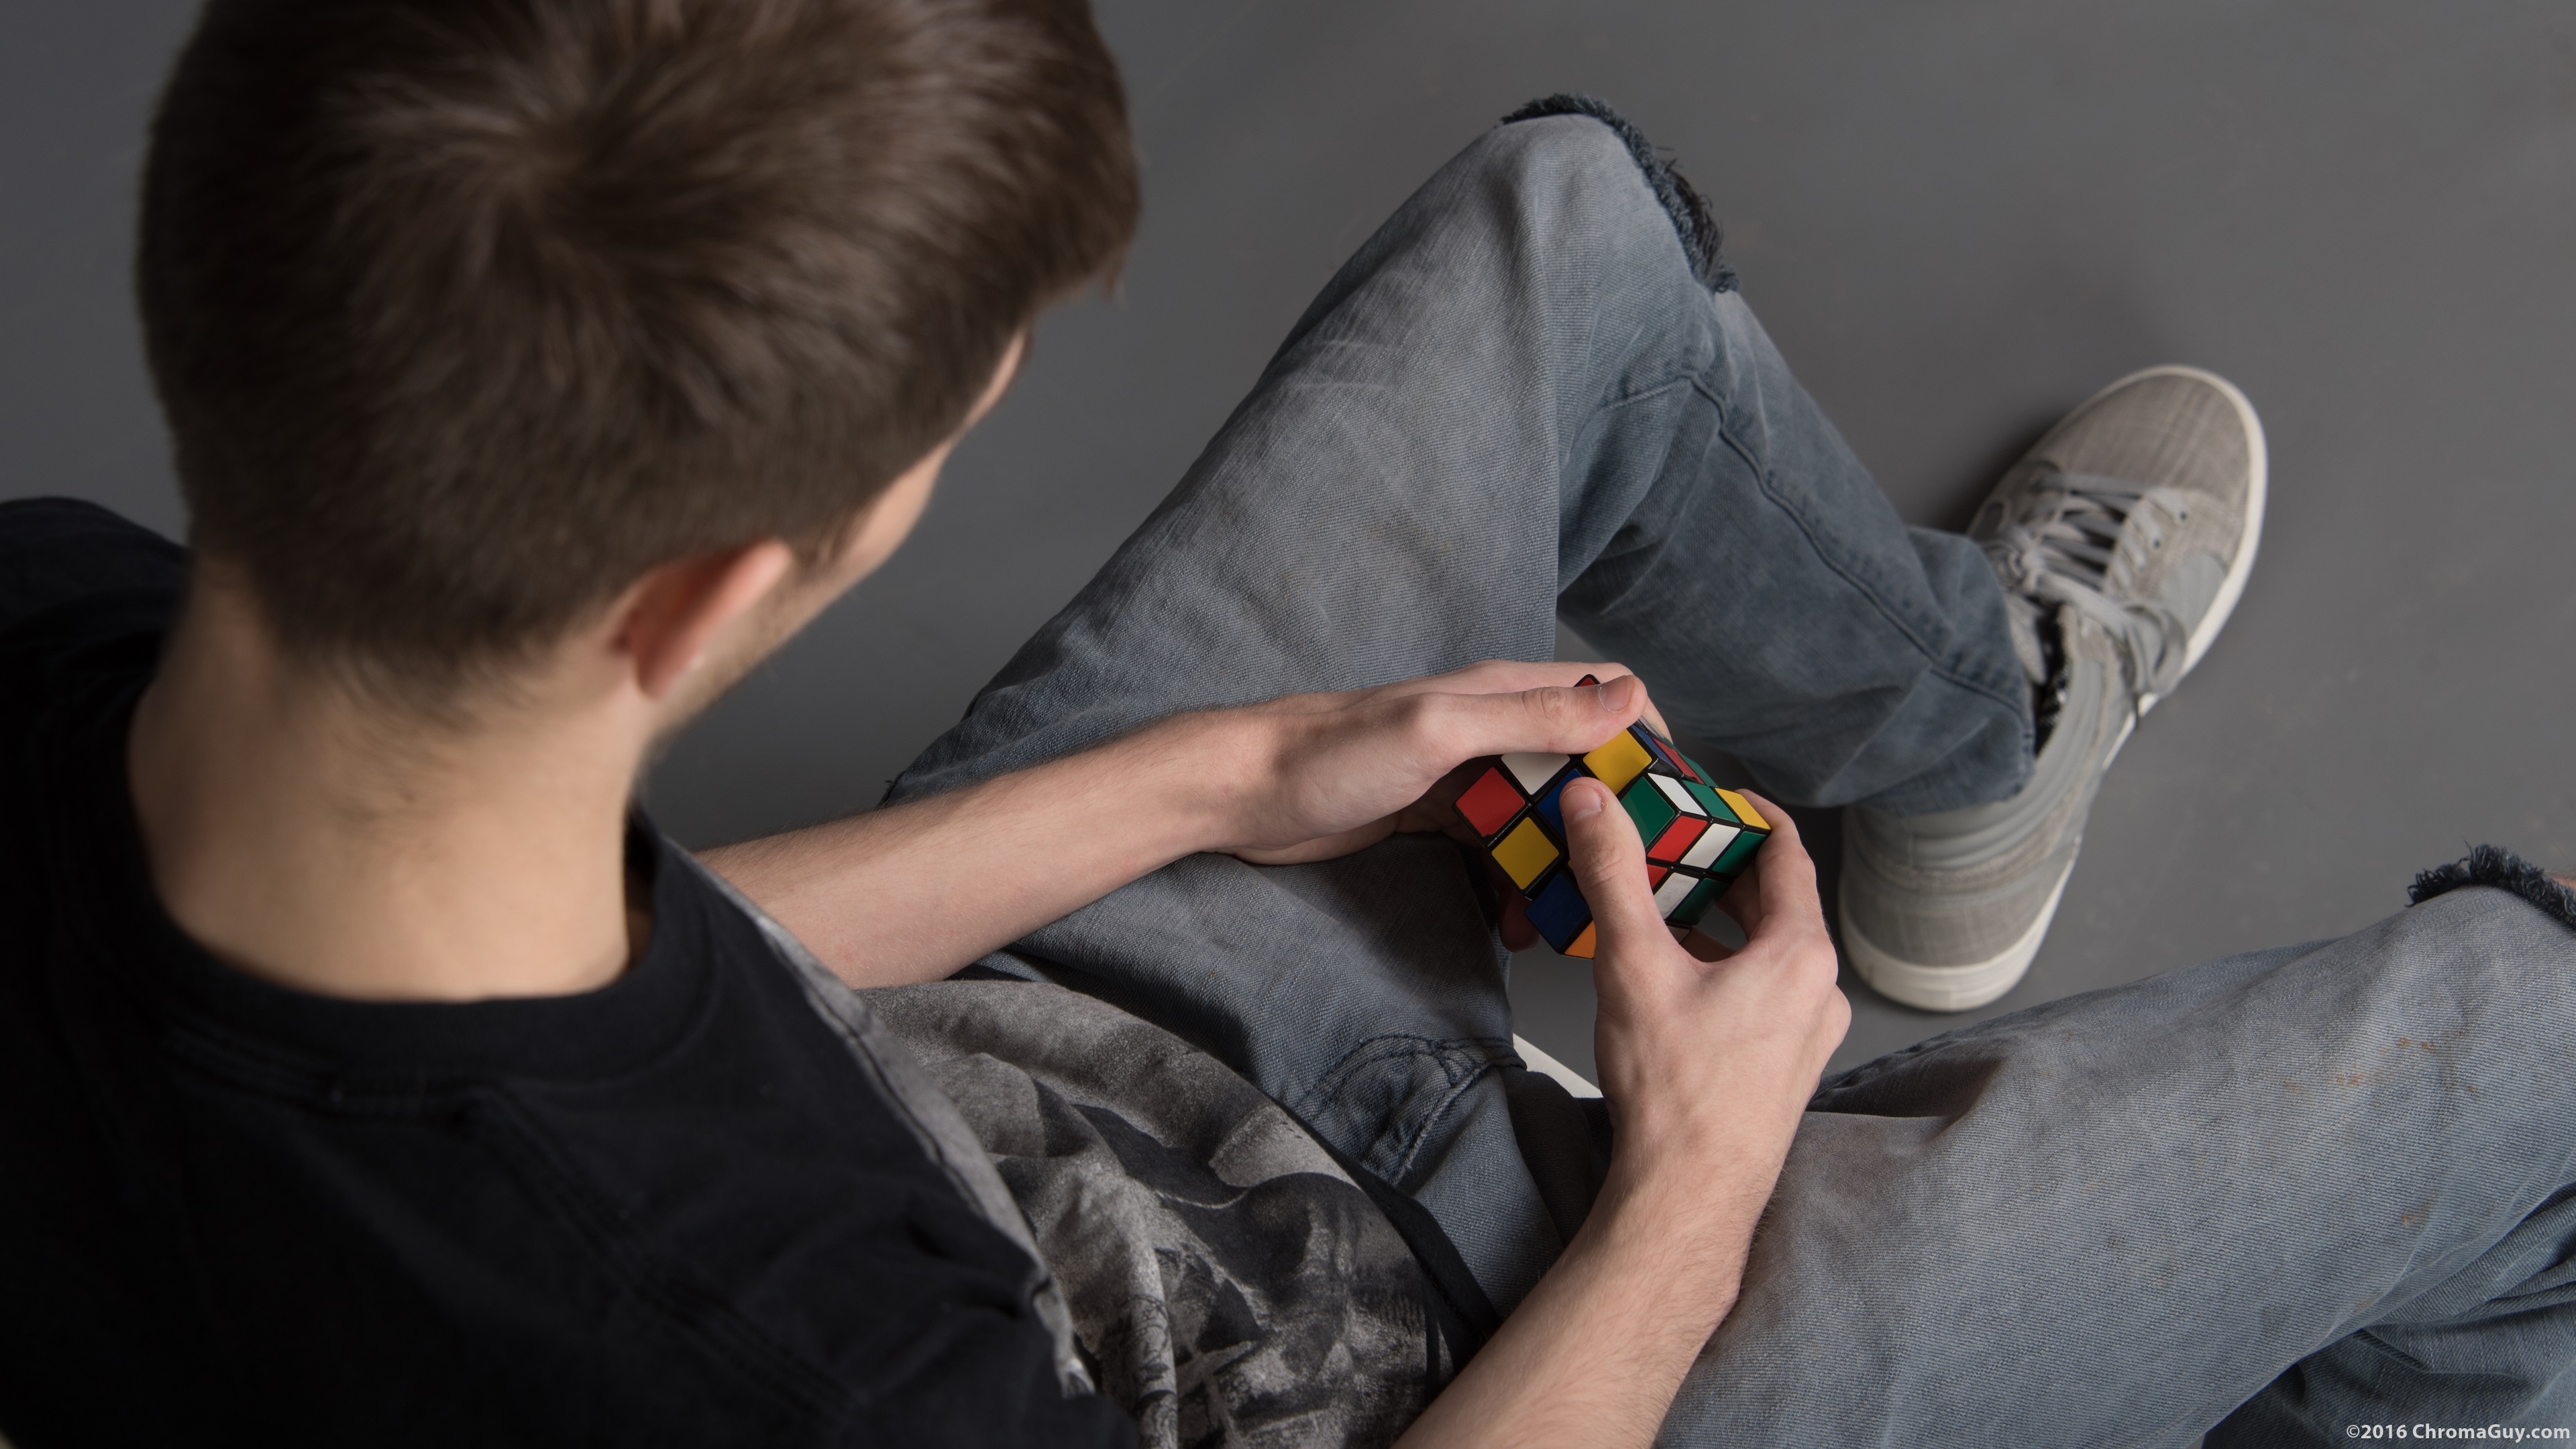 Boy playing with rubik's cube